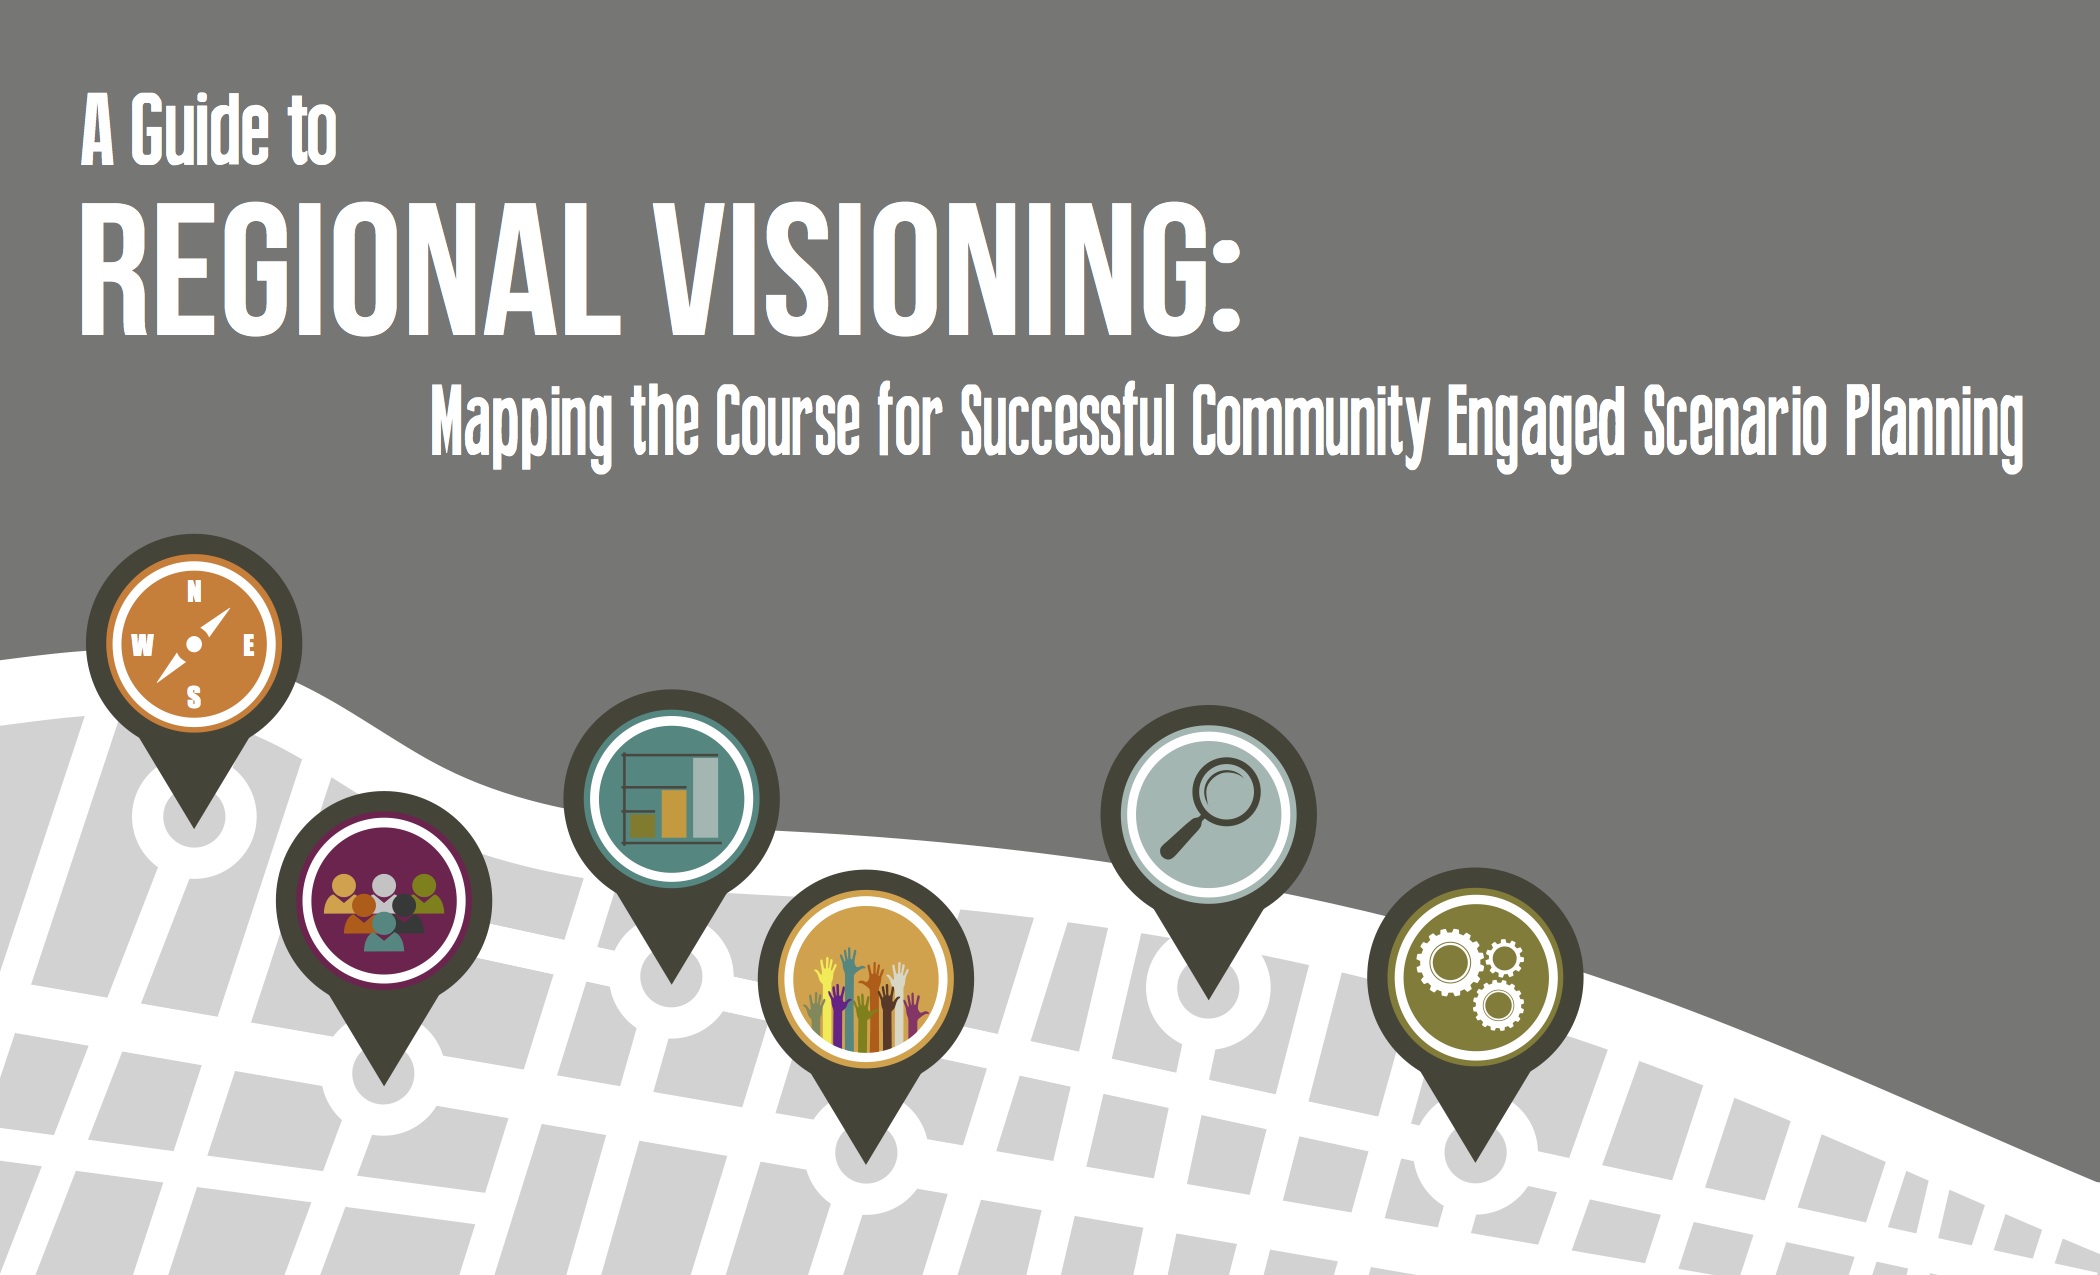 A Guide to Regional Visioning